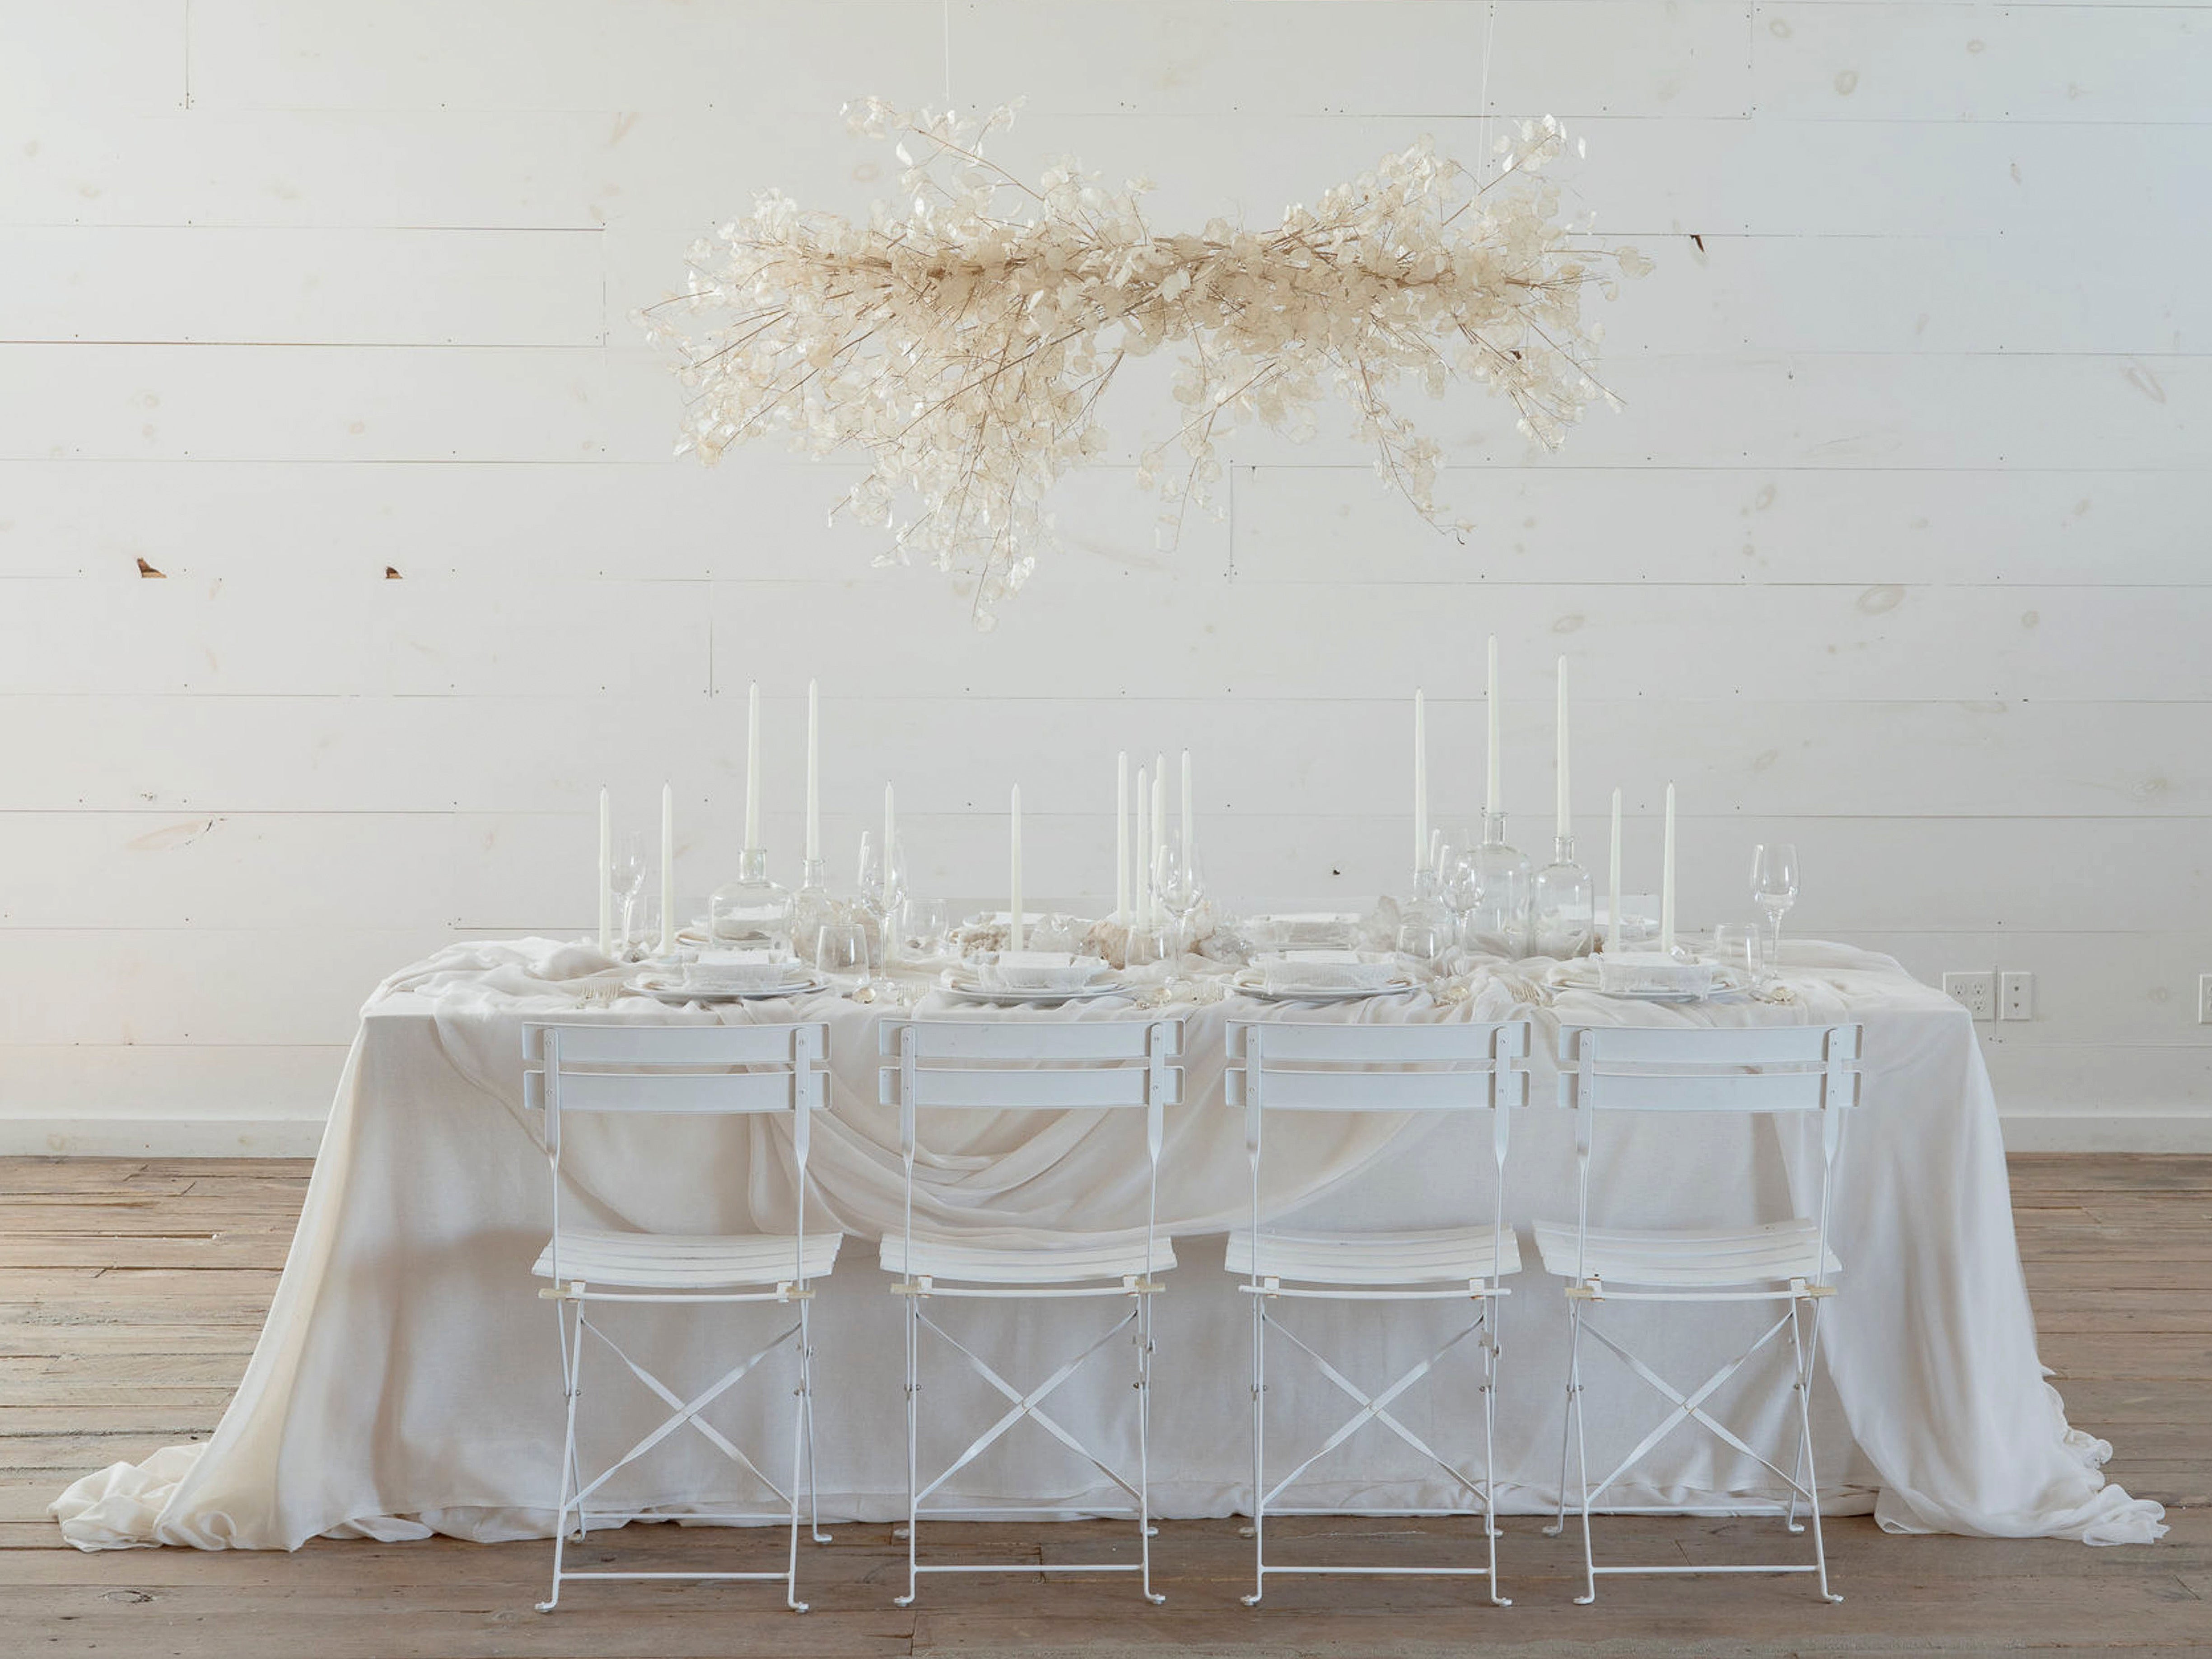 How to create a Monochromatic White table setting for your wedding day with silk and willow table linens